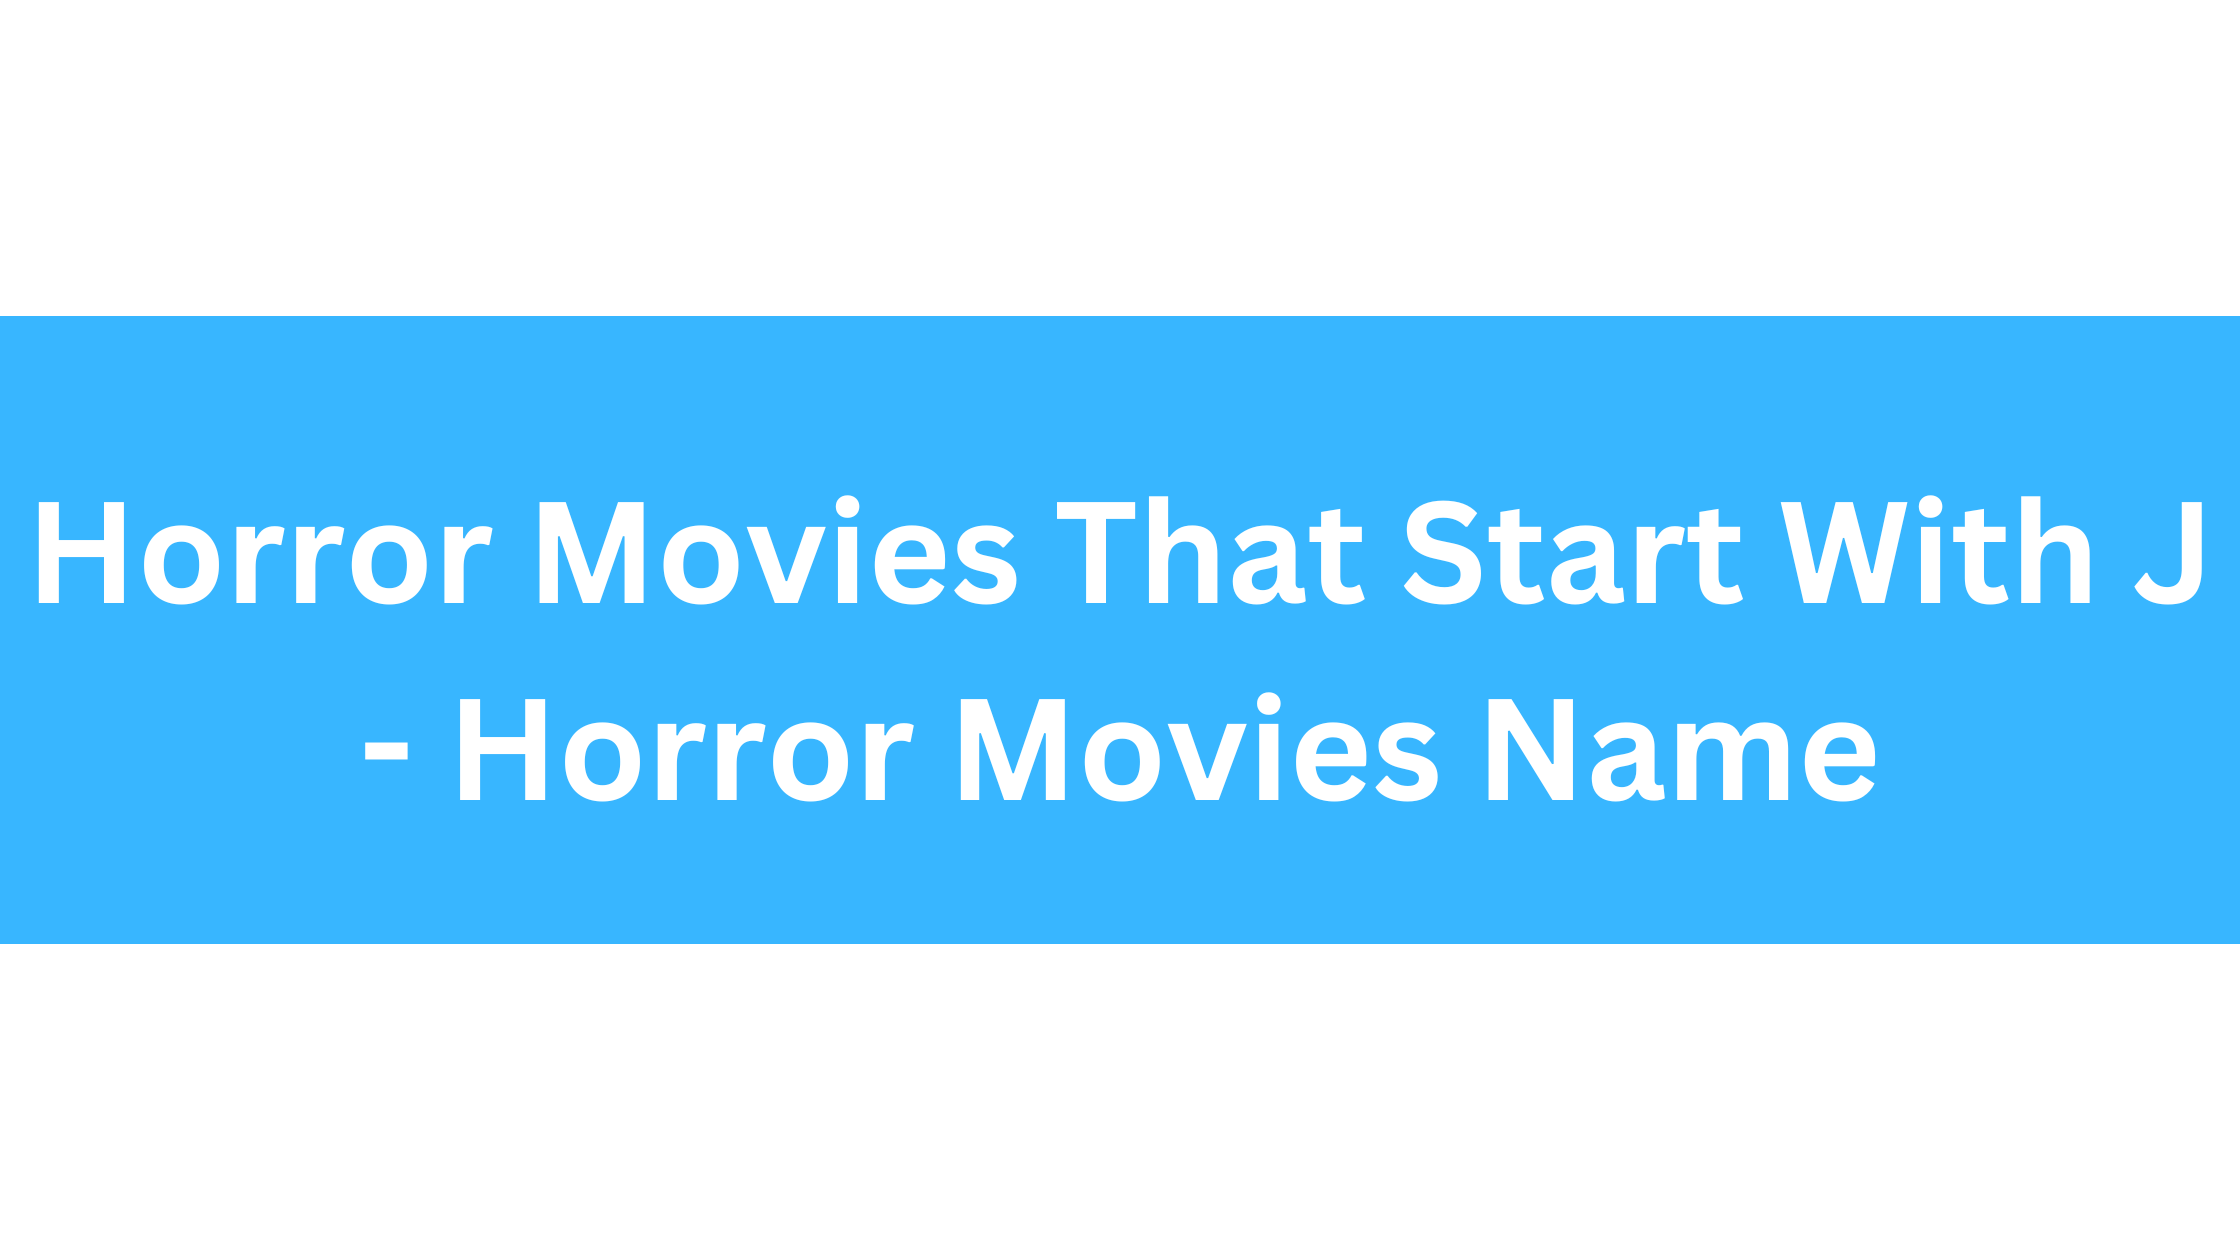 Horror Movies That Start With J